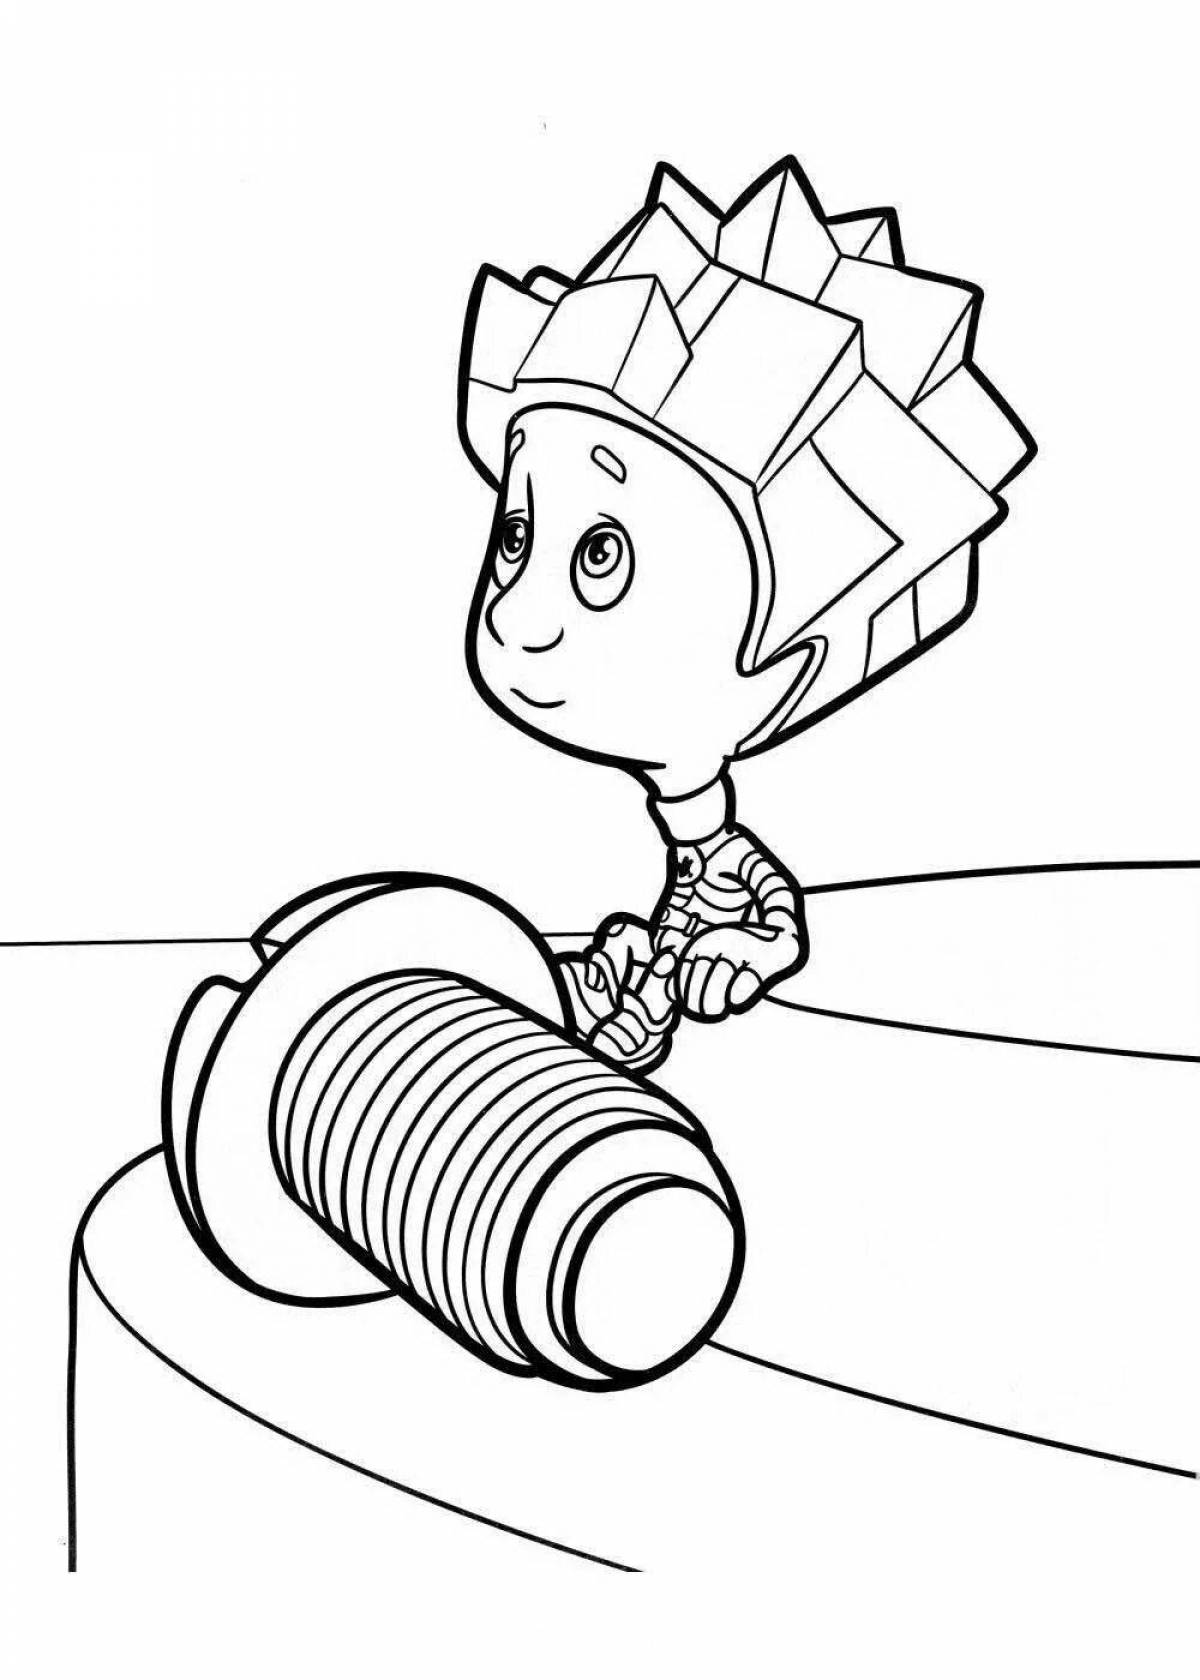 Great coloring page turn it on